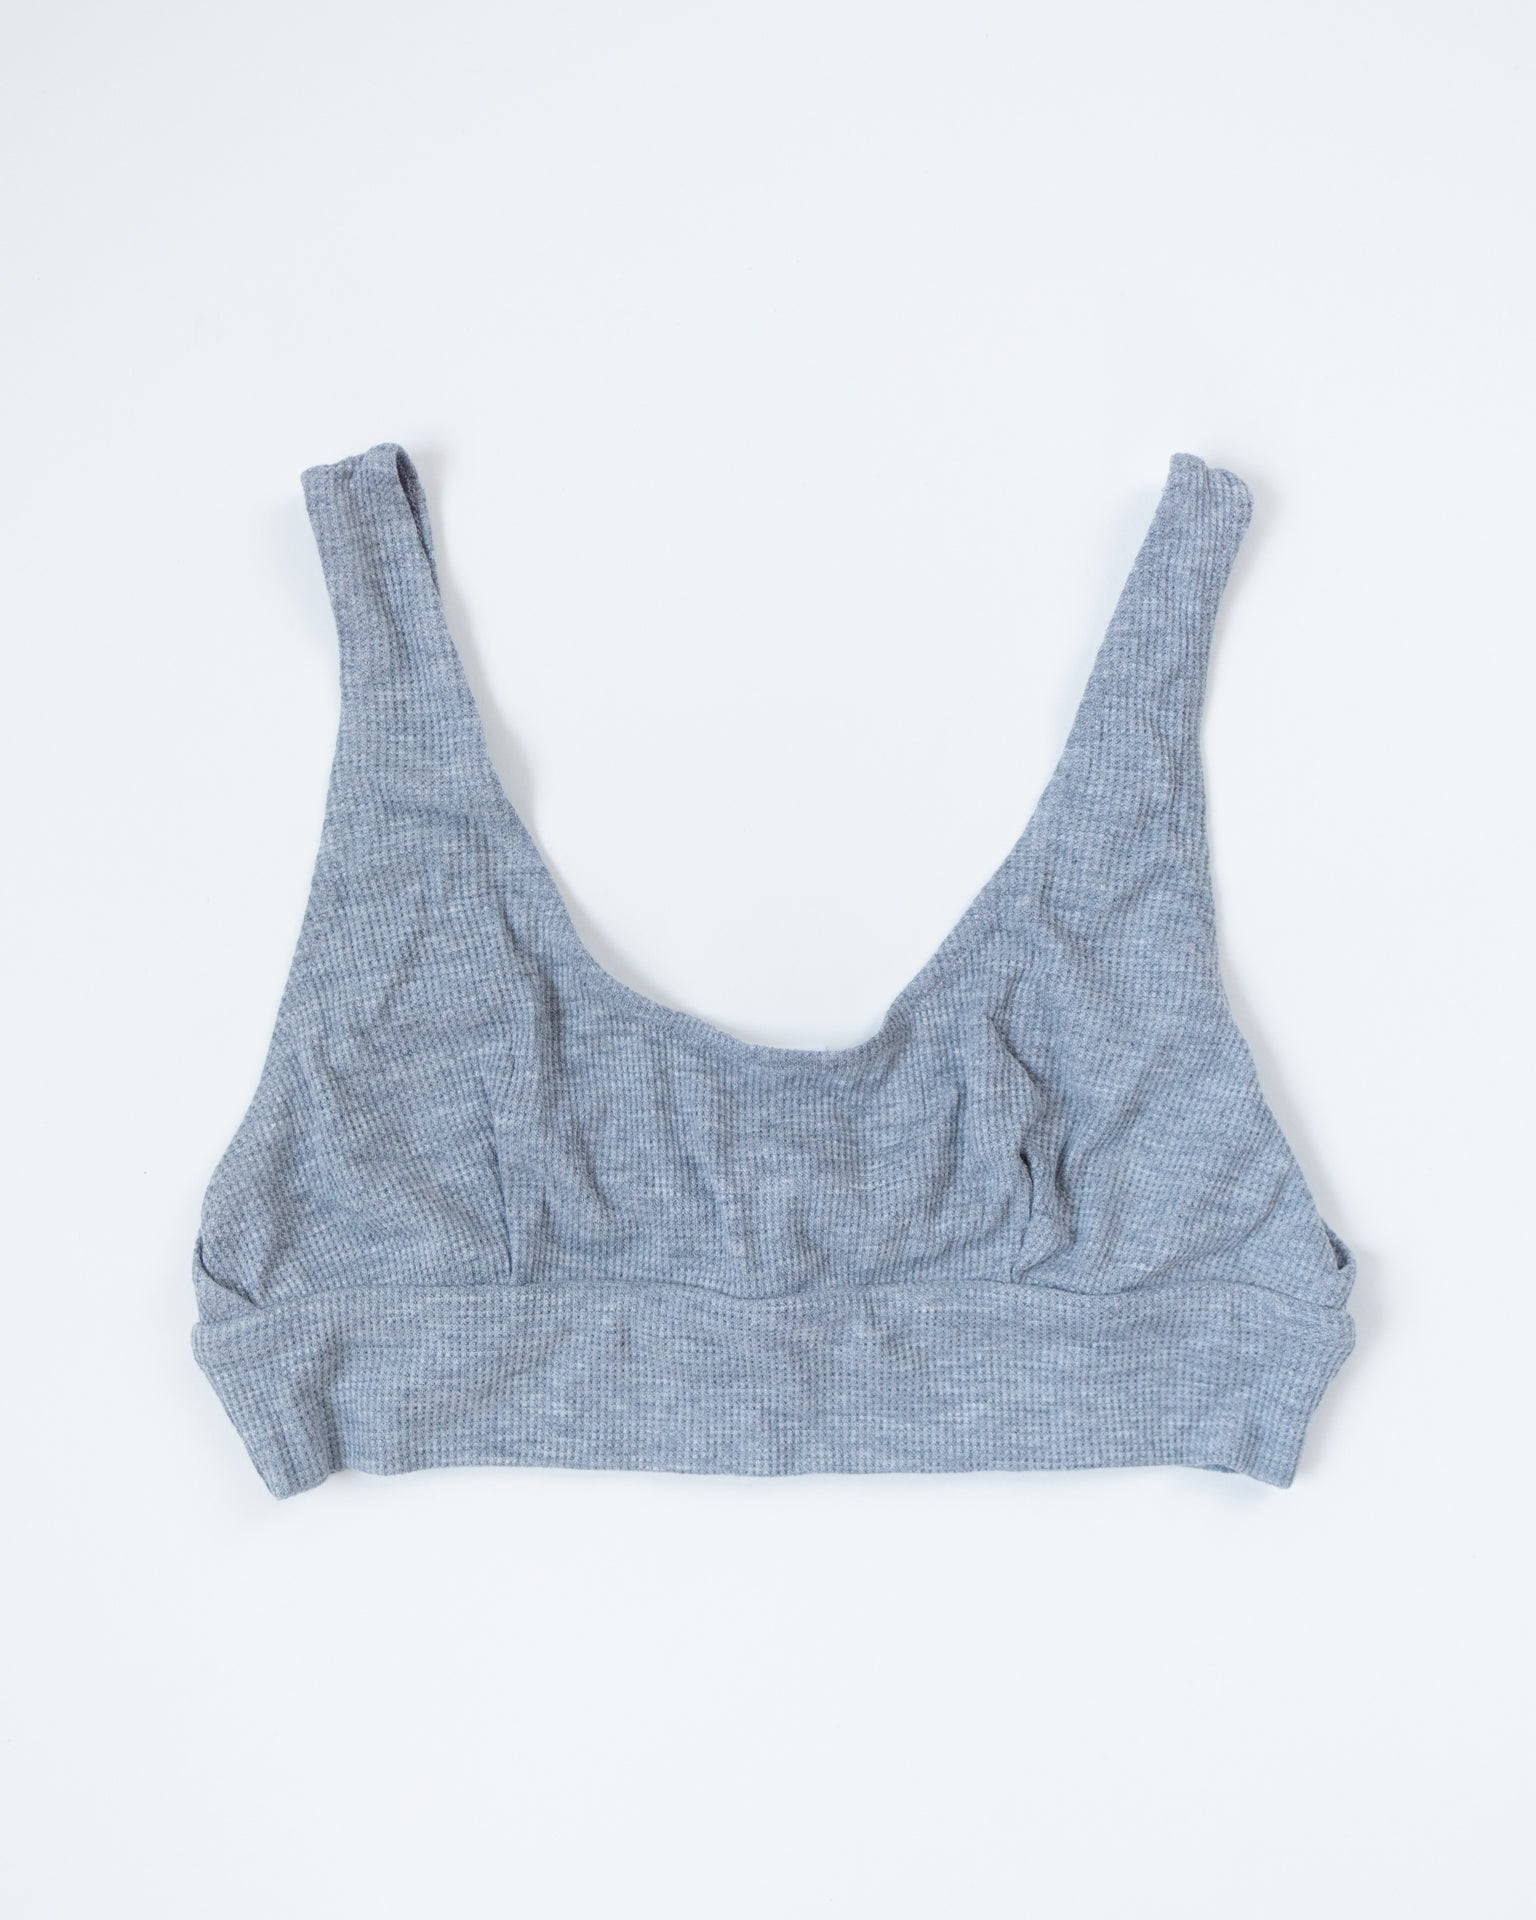 Only Hearts FW Thermal Tank Bralette in Heather Grey- Bliss Boutiques